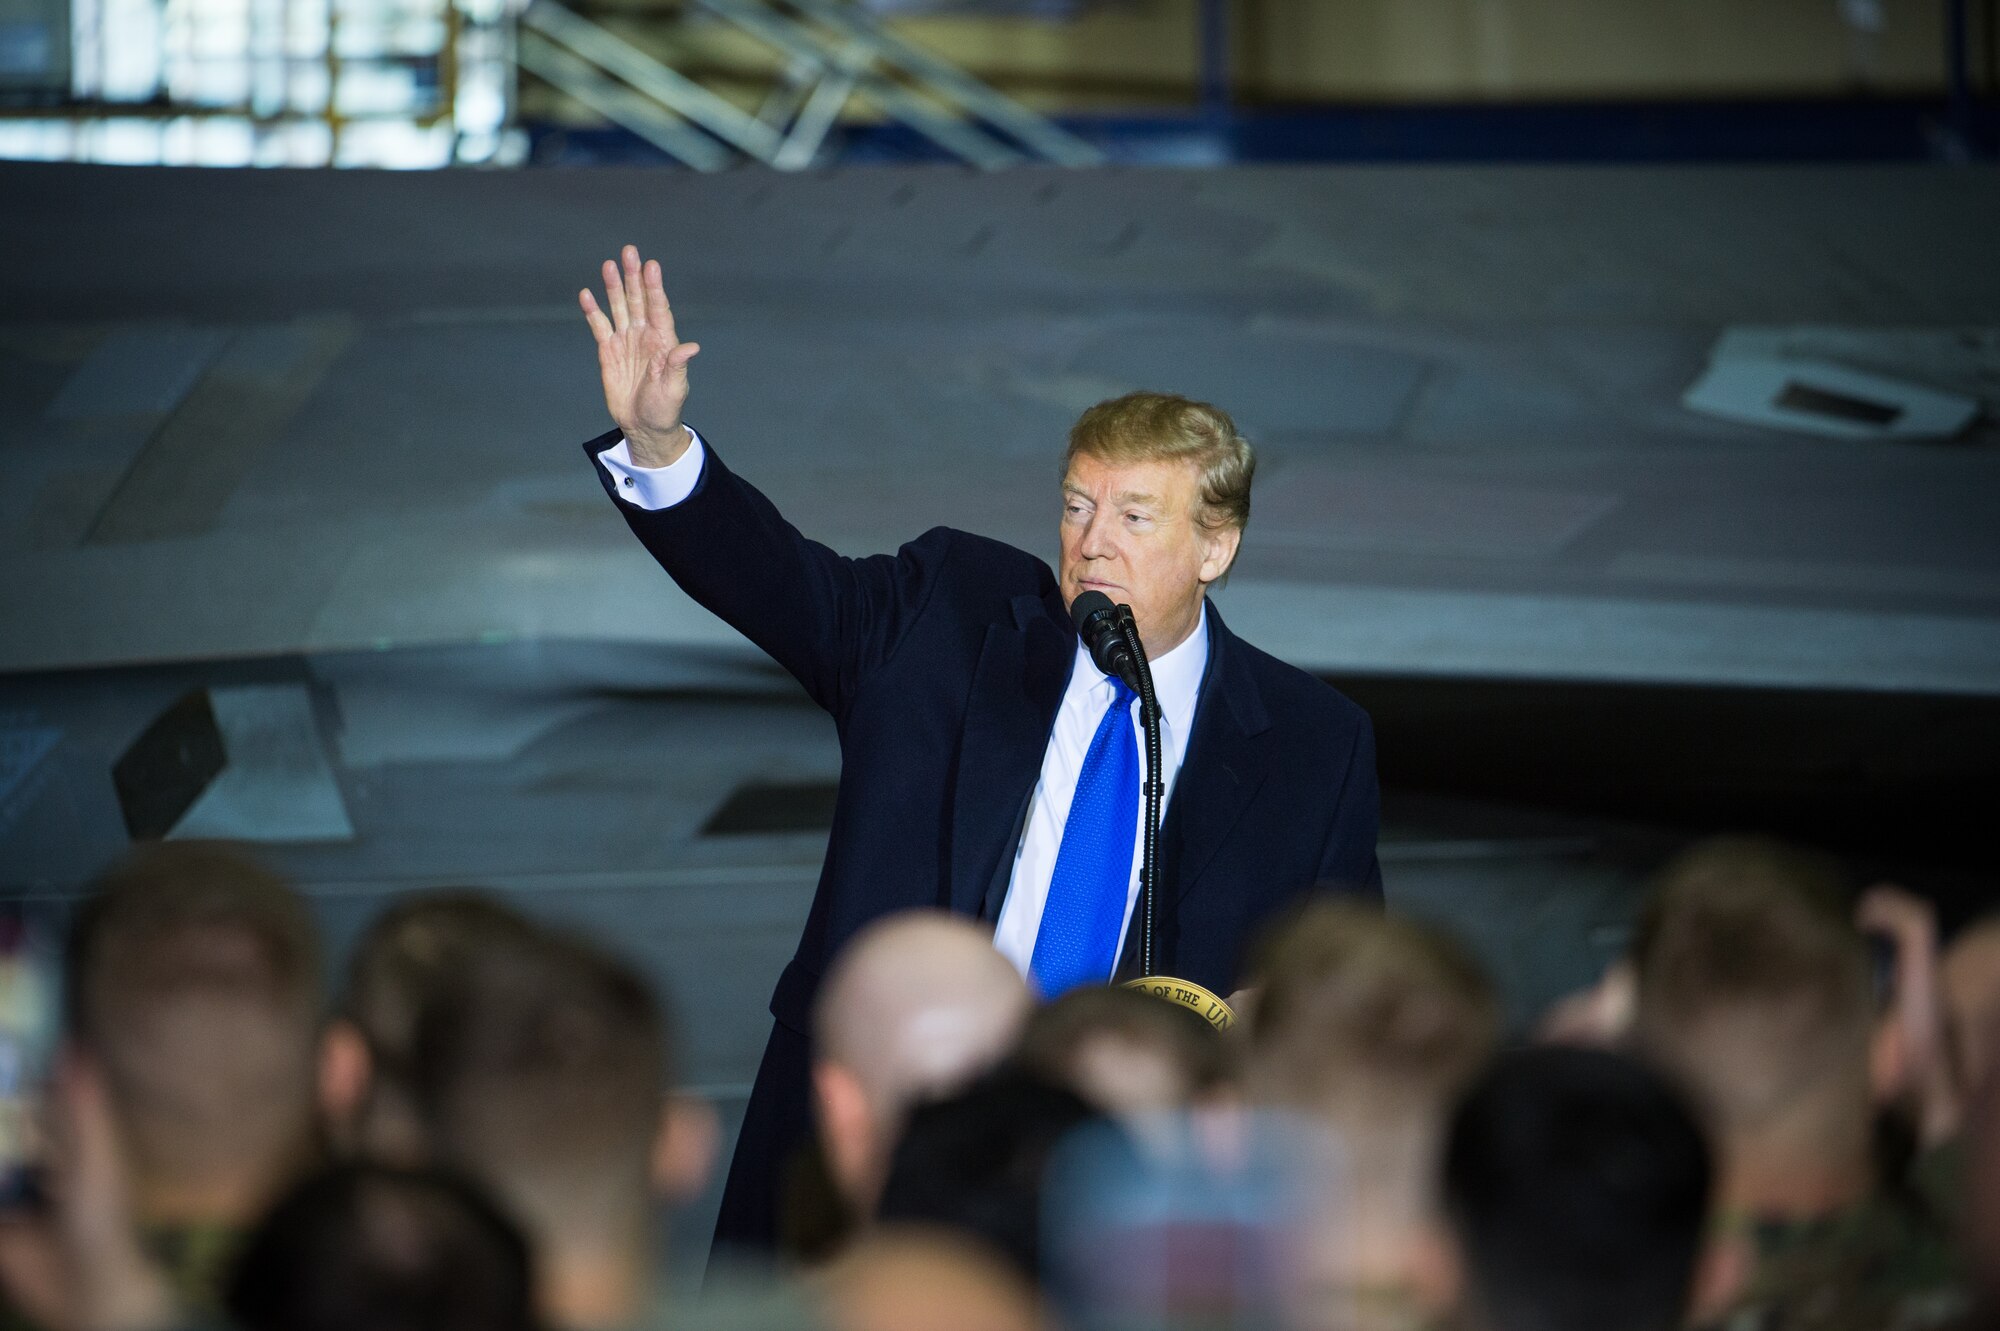 President Donald Trump waves to more than 100 Airmen, Sailors, Soldiers, Marines and Coast Guardsmen at Joint Base Elmendorf-Richardson, Alaska, Feb. 28, 2019. The president was at the base to meet with service members after returning from a summit in Hanoi, Vietnam.  His plane refueled before continuing to Joint Base Andrews, Maryland.